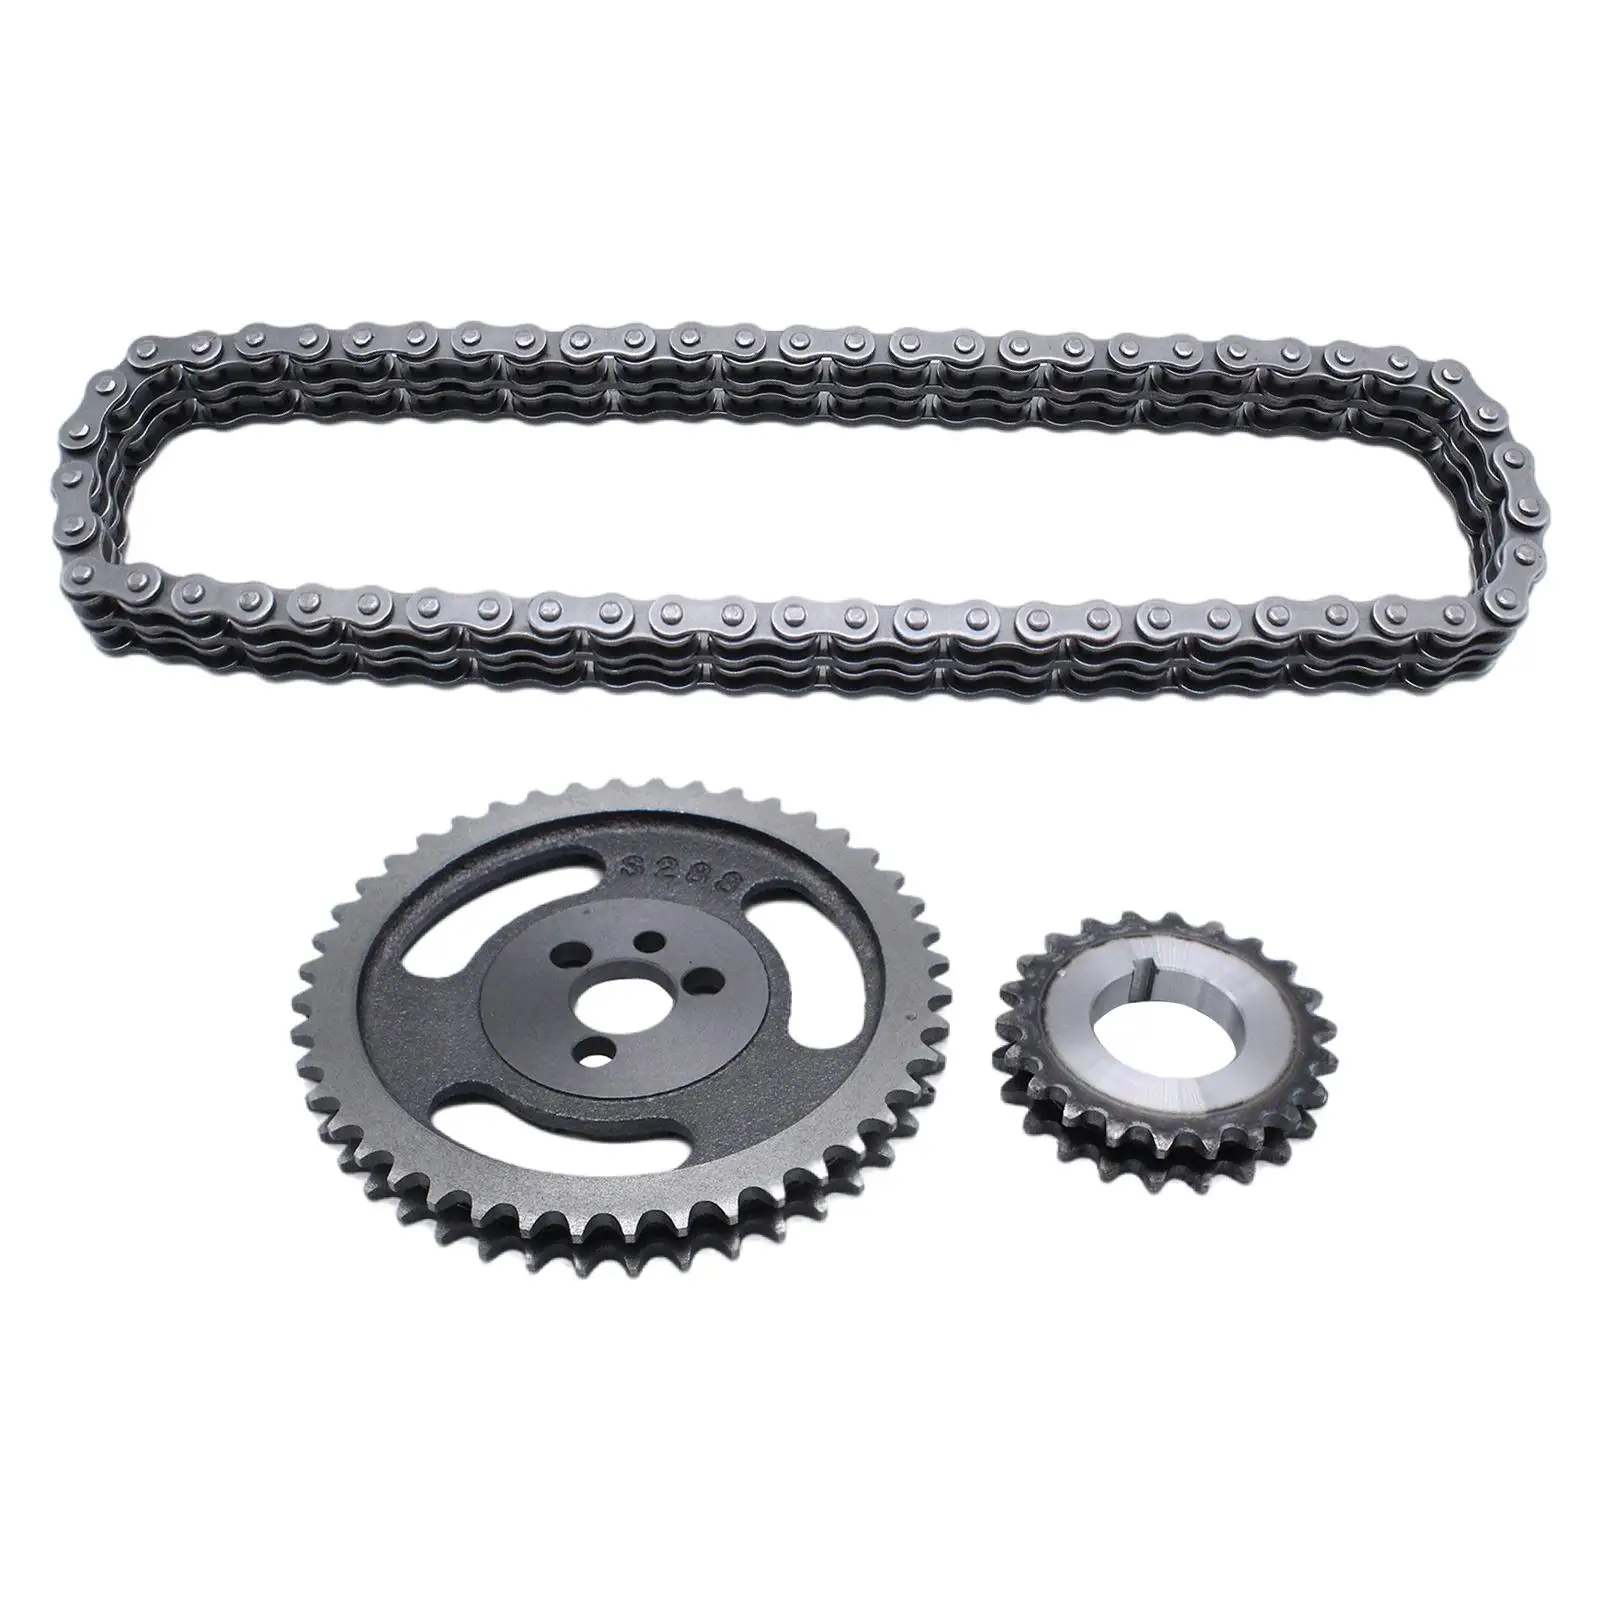 Timing Chain and Gear Set TS163 Double Row 40210 for  Sbc 5.7L 283 305 327 350 383 400